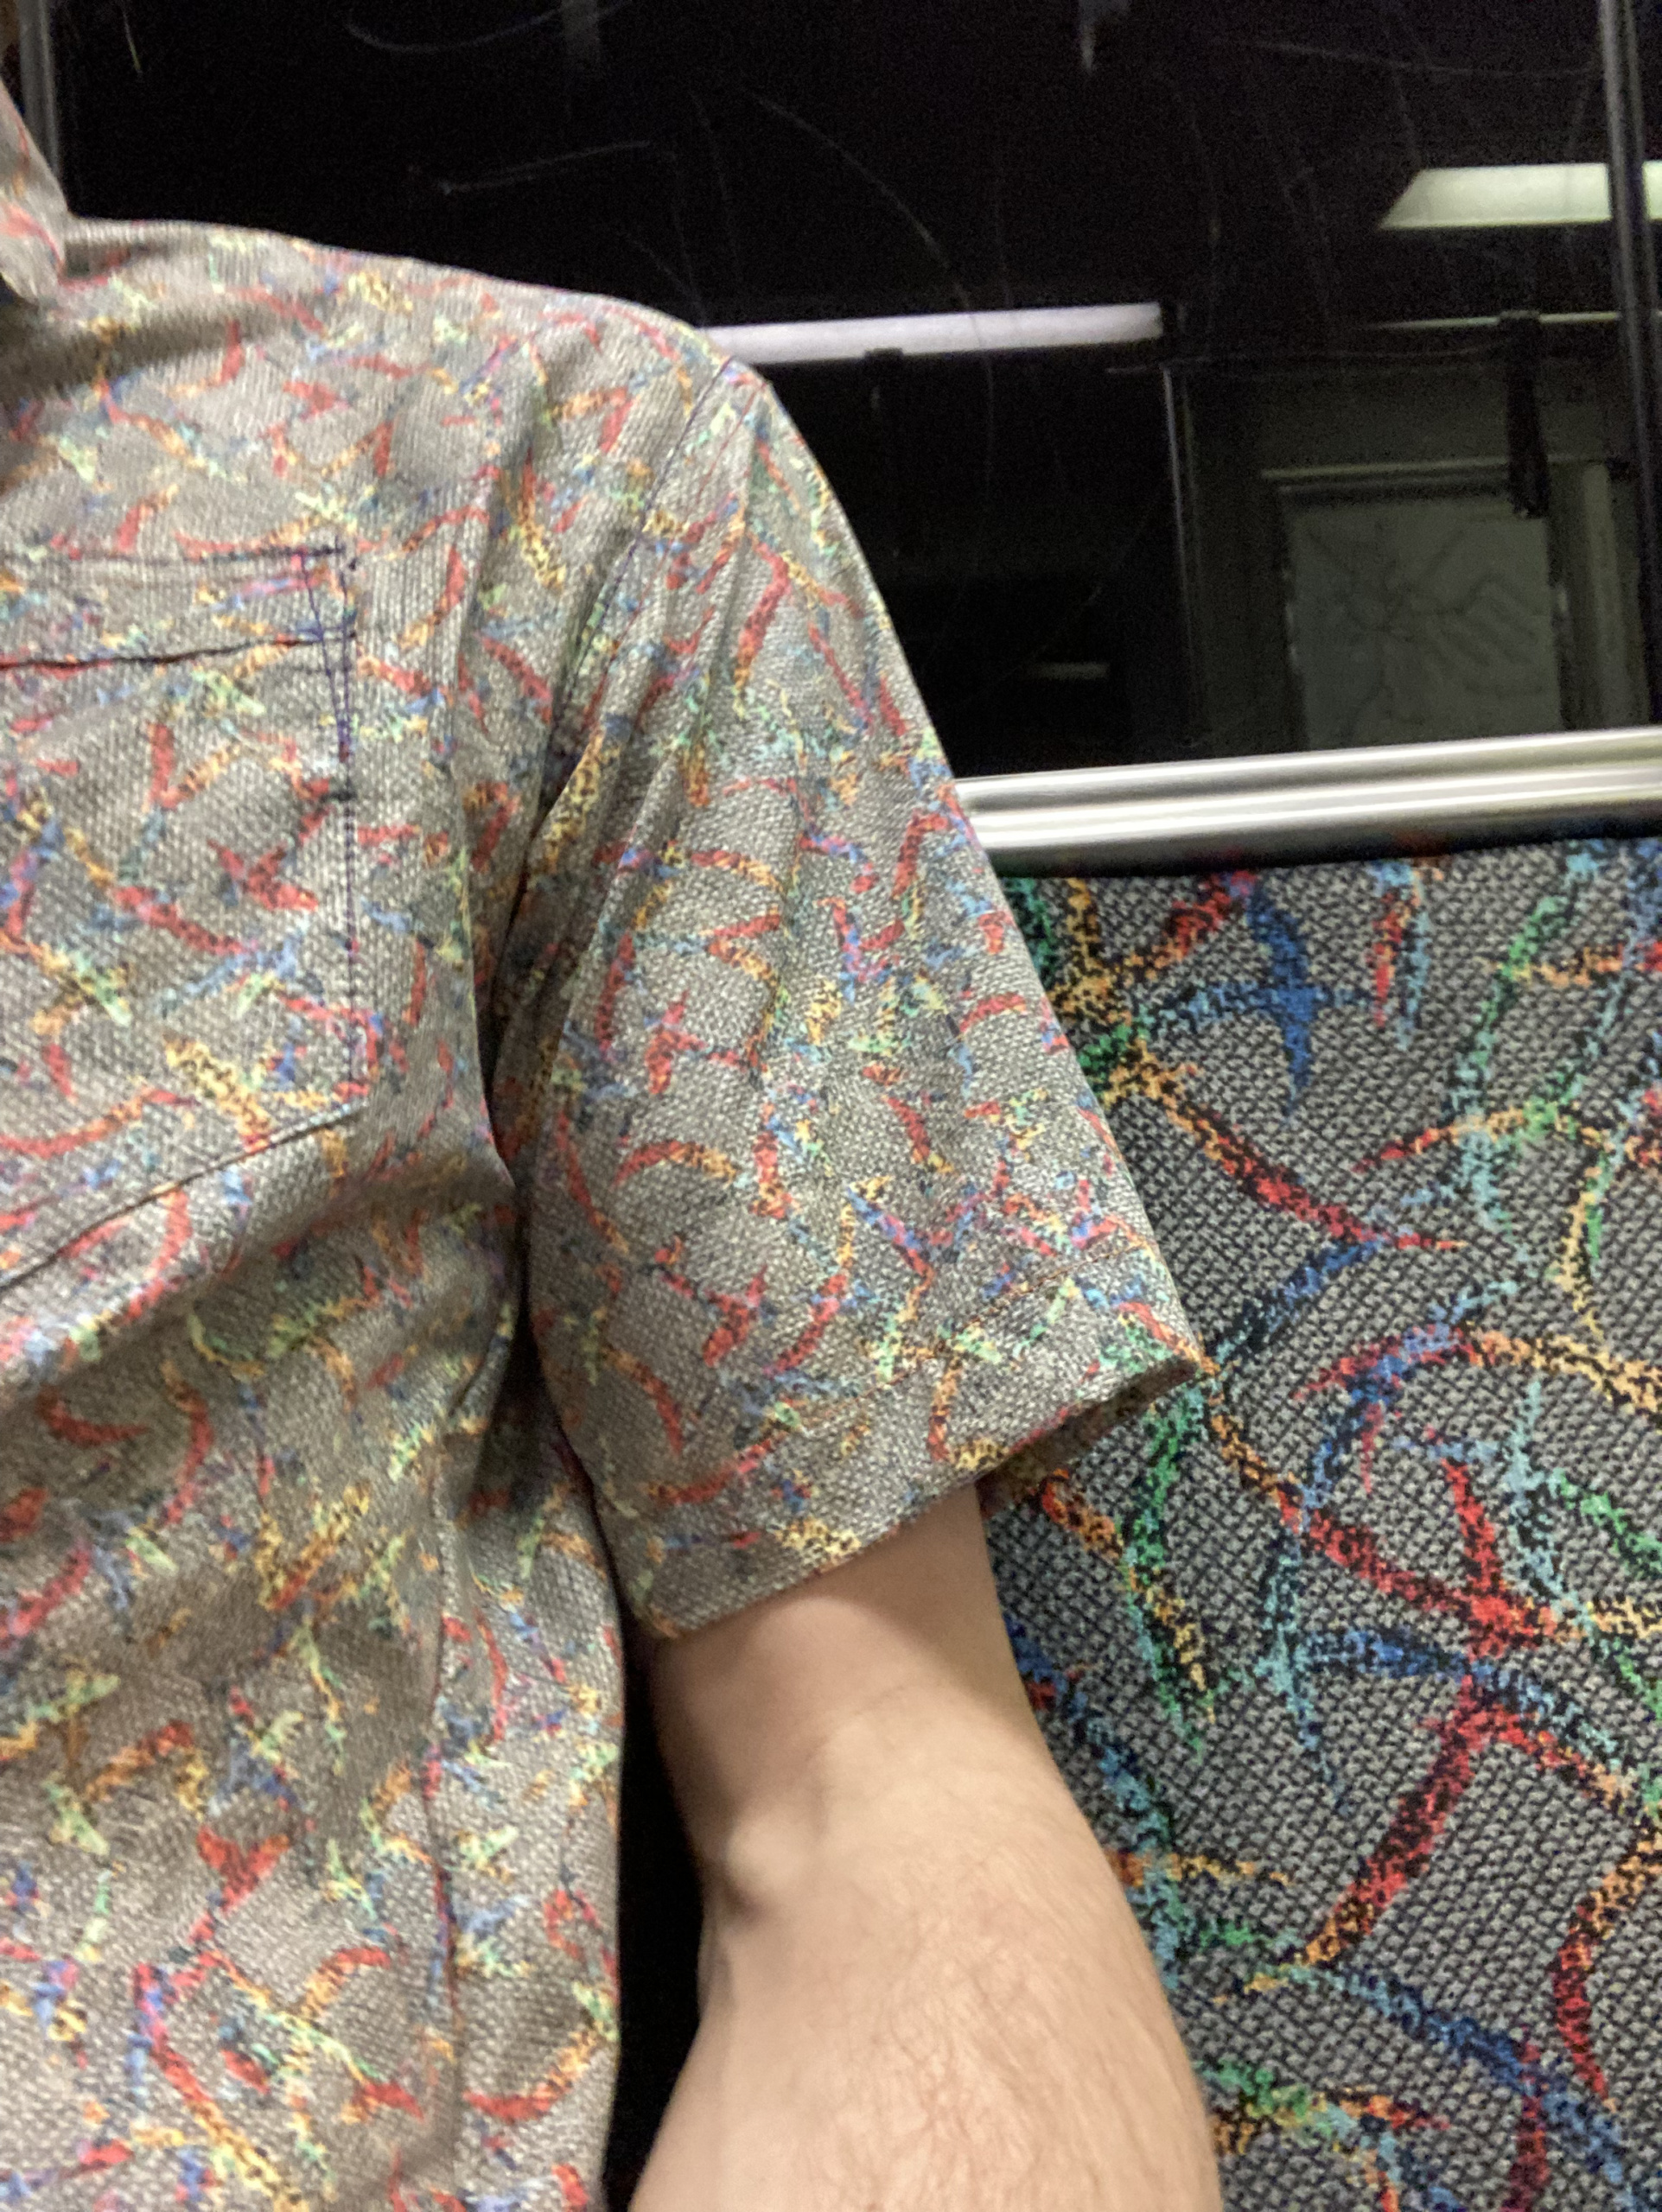 At first the MBTA folks were reluctant to give me the old seats. So I made a custom shirt to try and convince them. It worked!